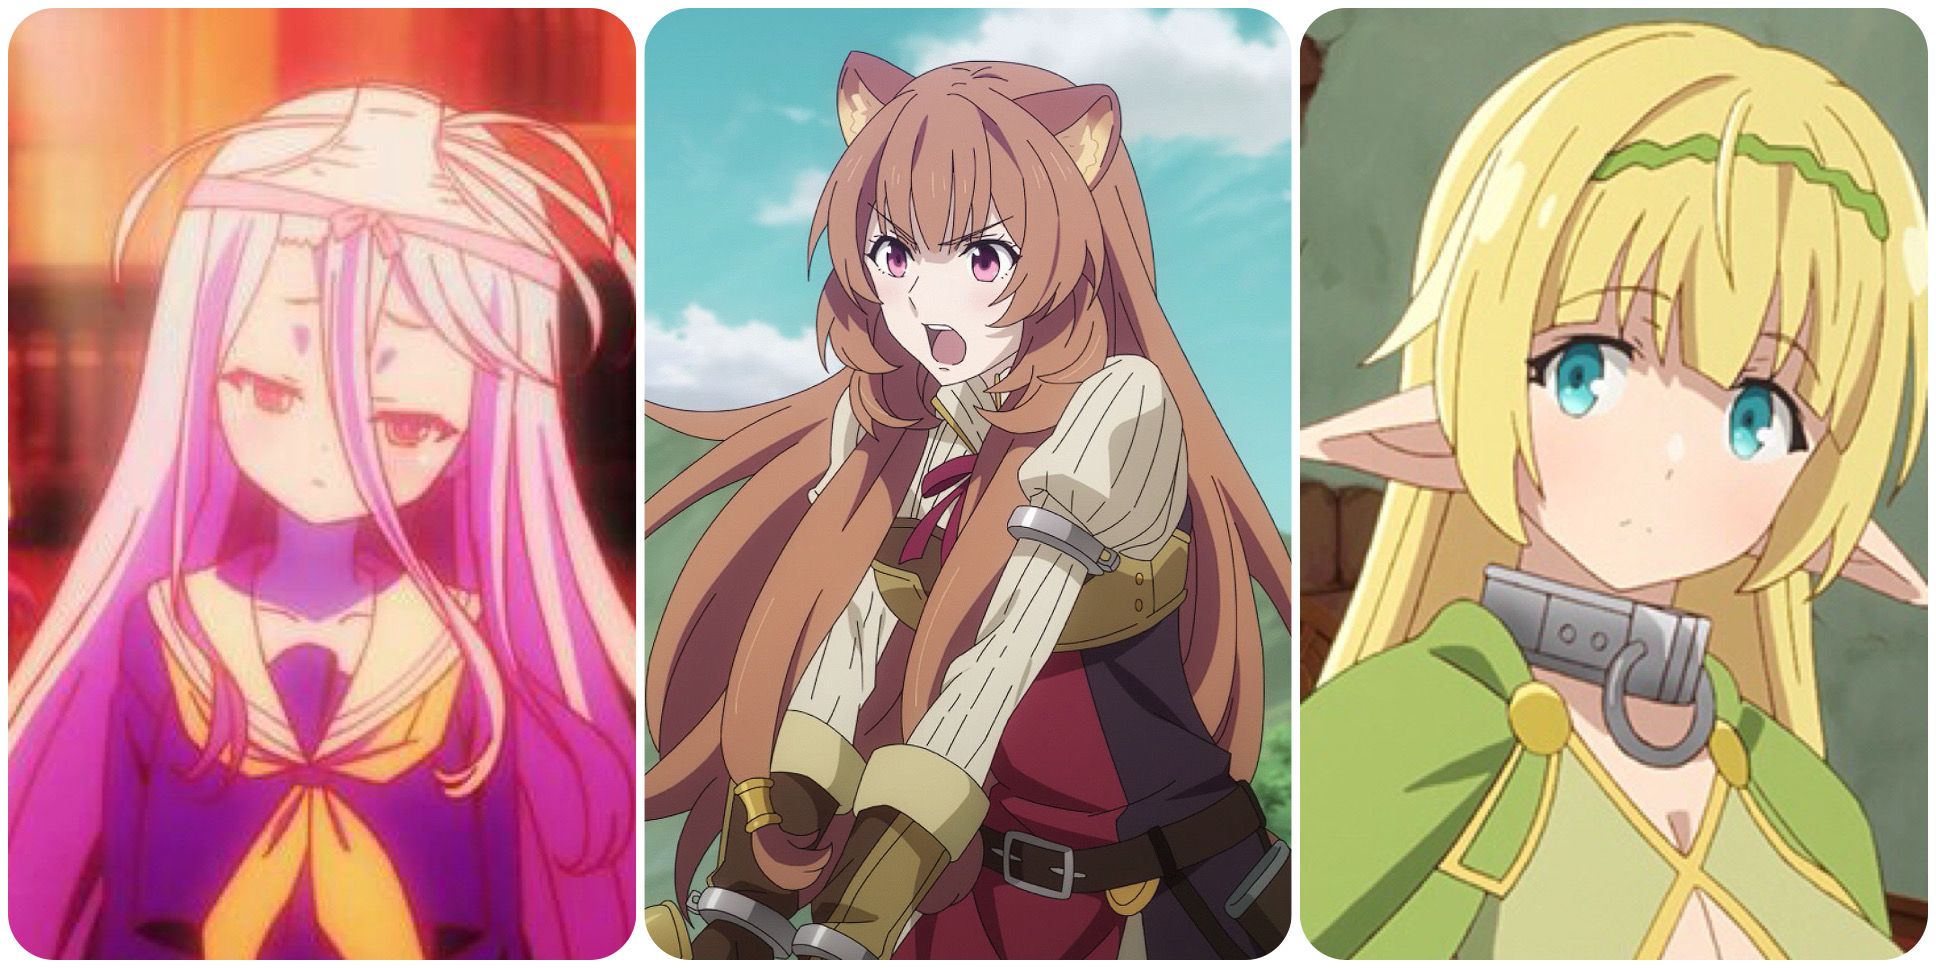 Main characters from No Game No life, Rising of the Shield Hero and How Not to Summon a Demon Lord